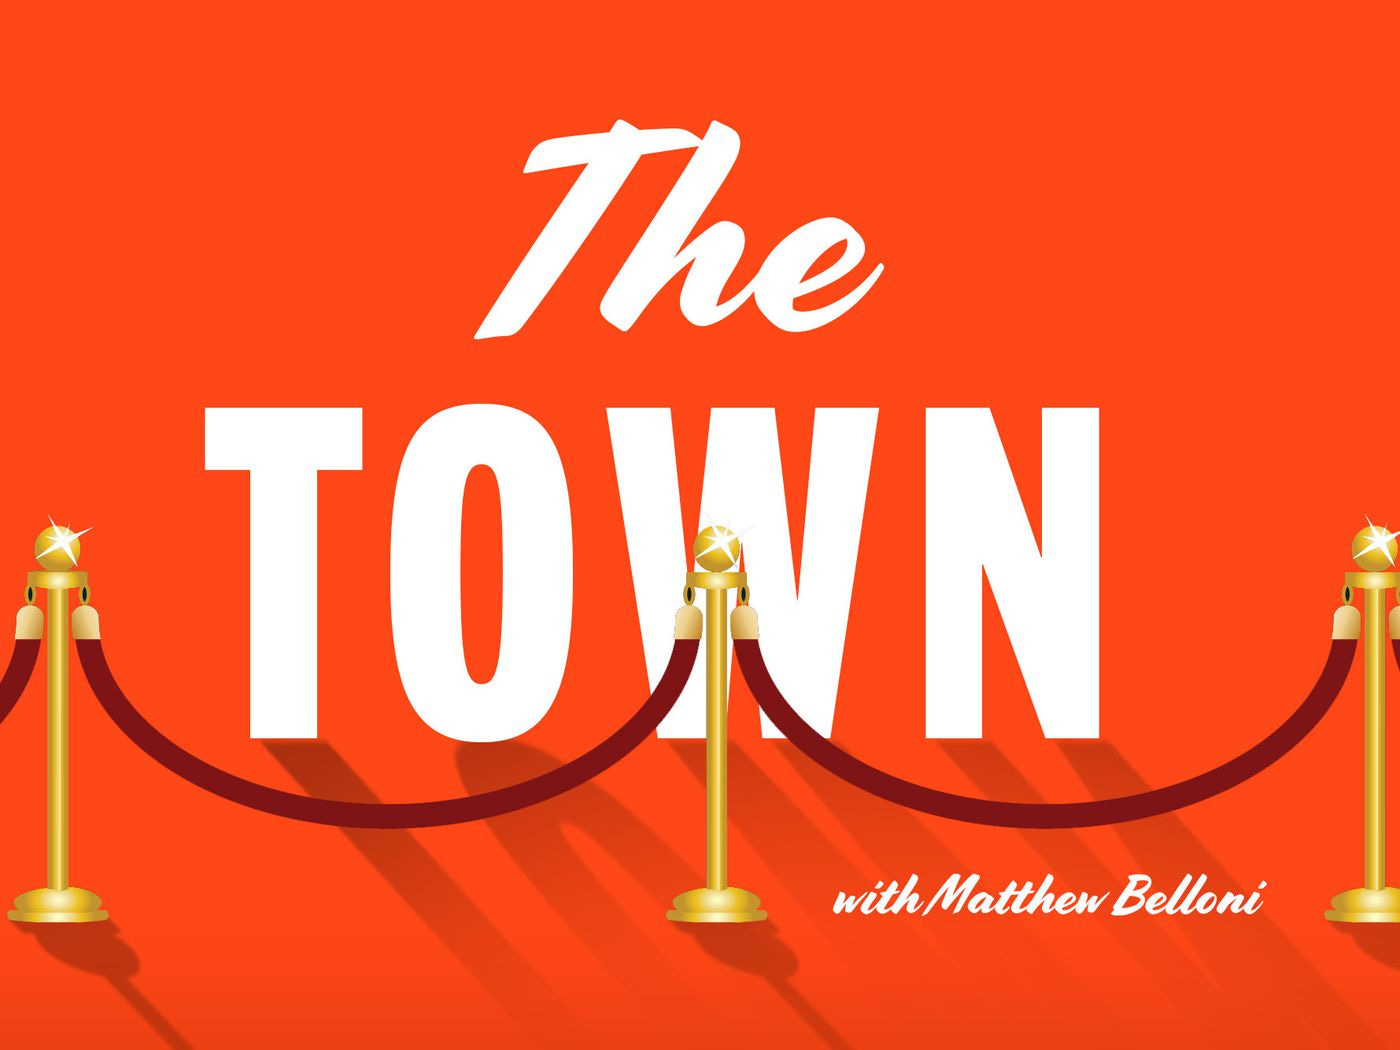 Introducing 'The Town With Matthew Belloni' - The Ringer